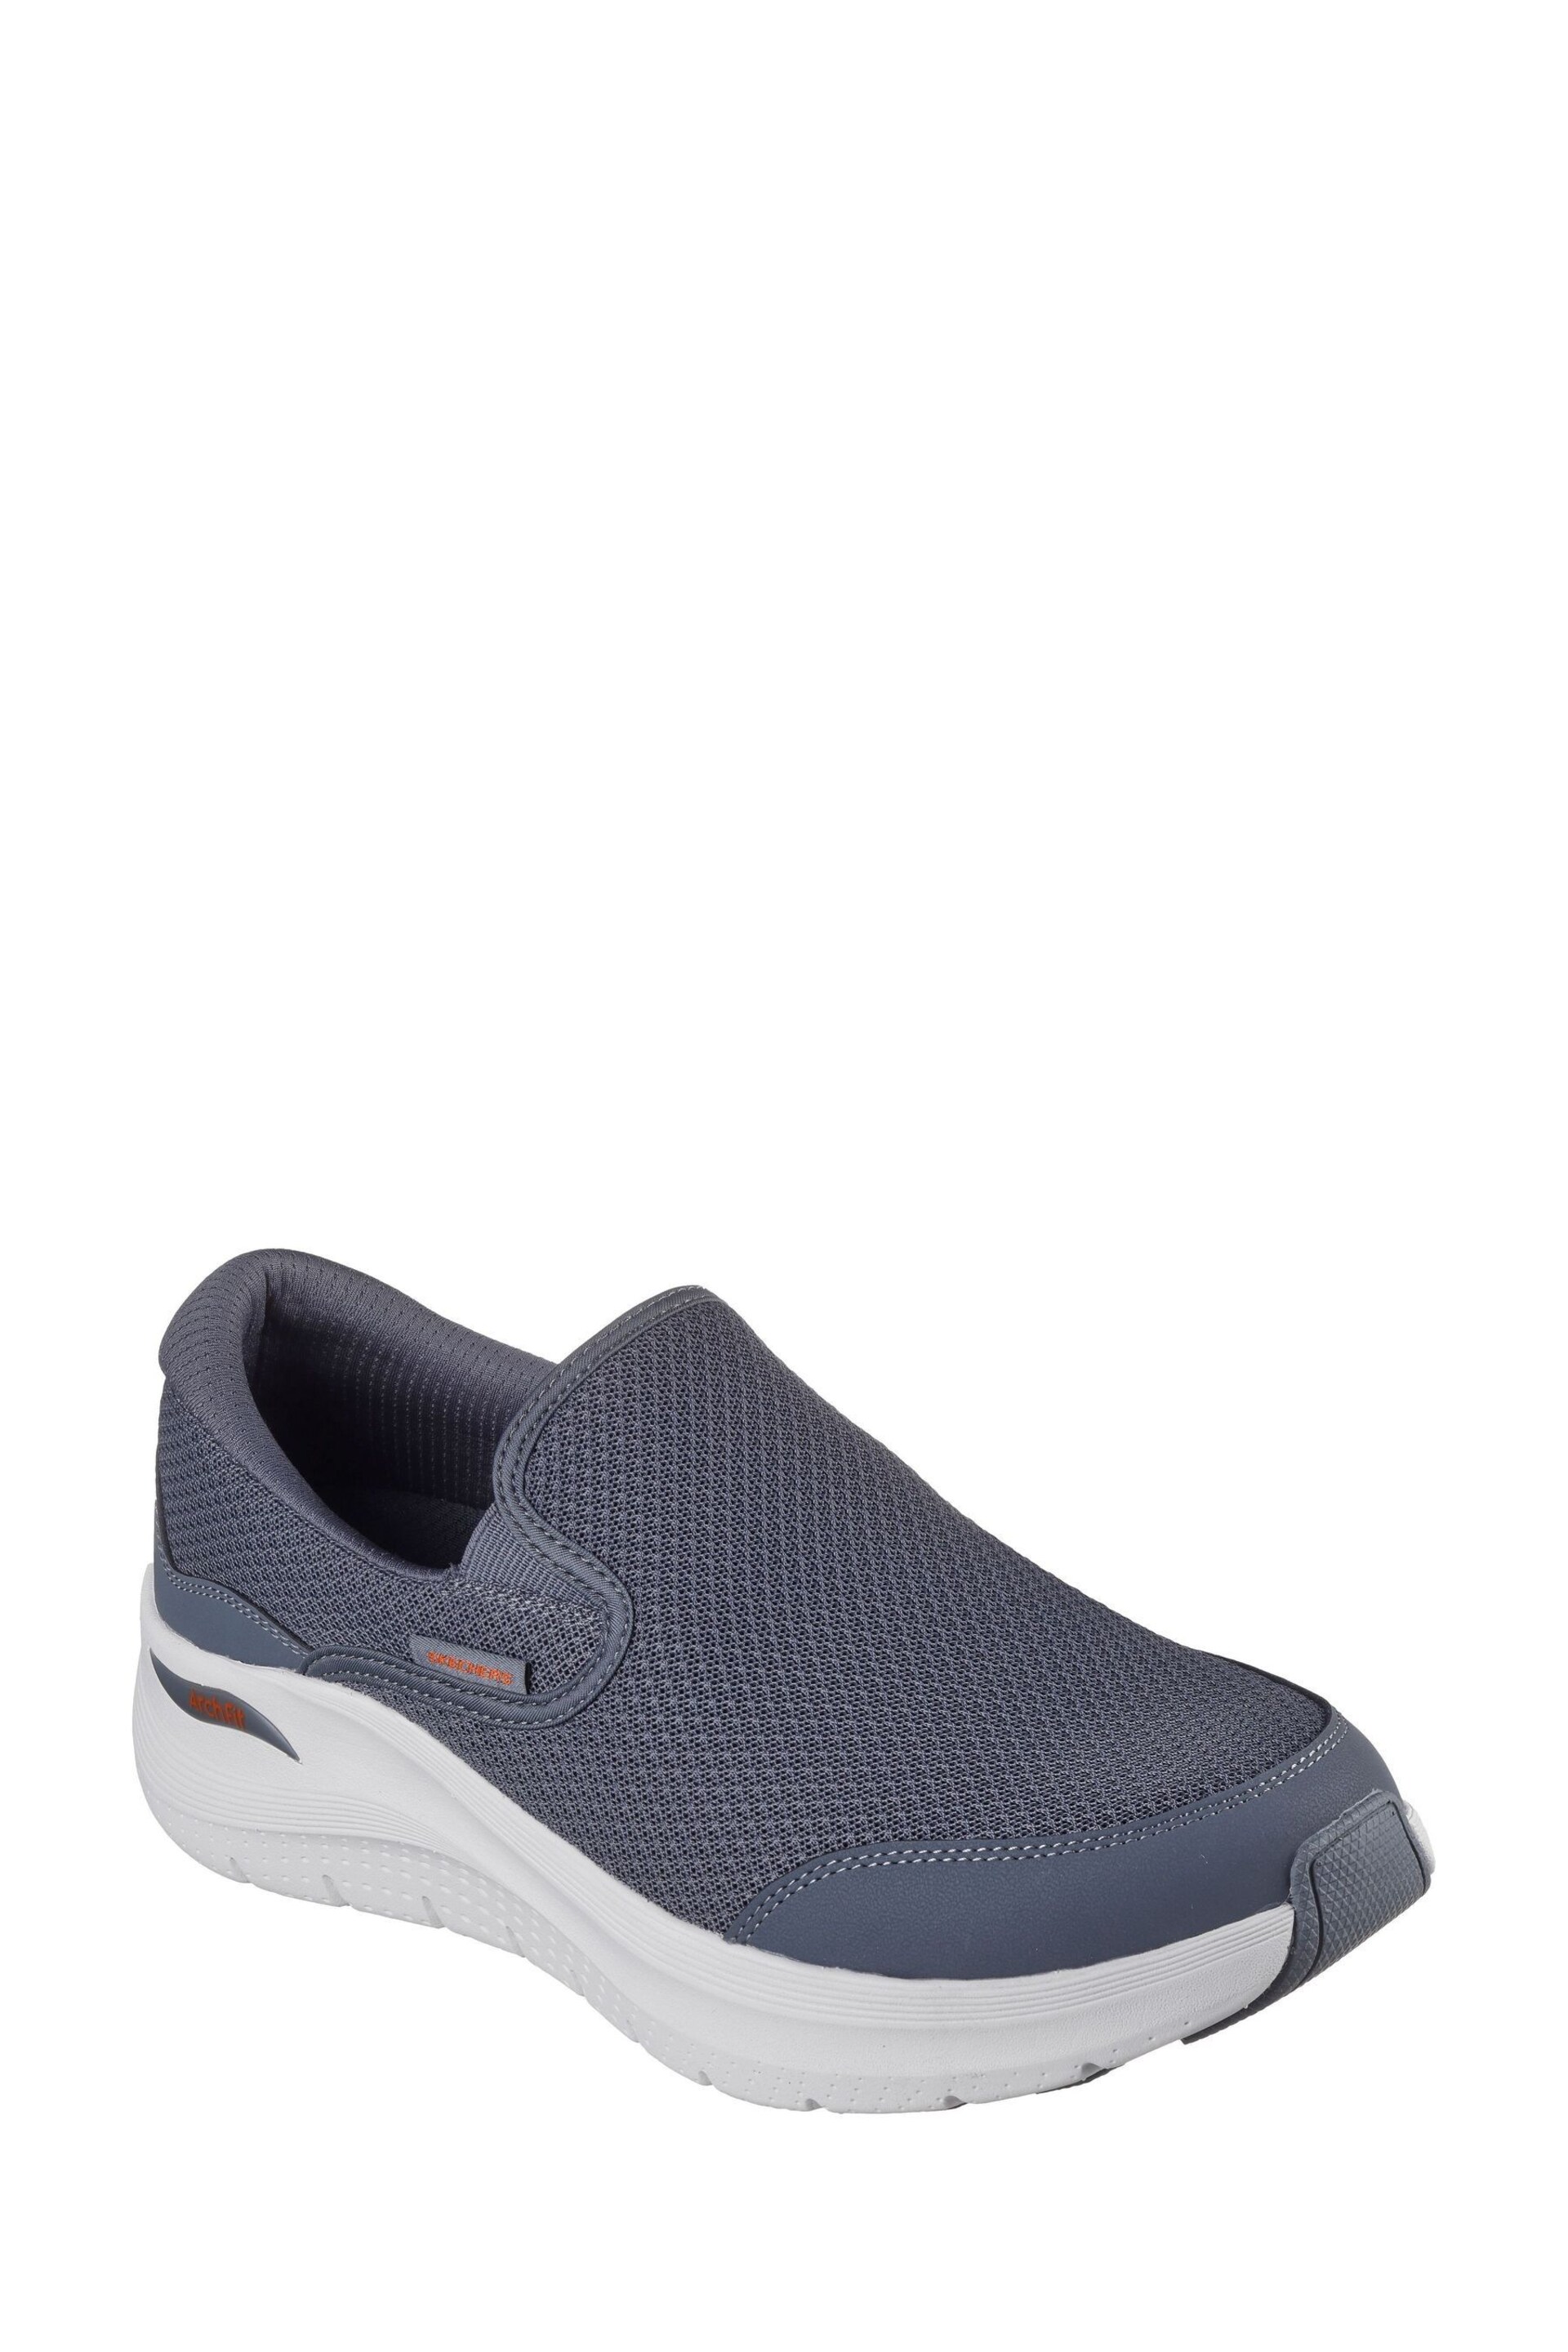 Skechers Grey Arch Fit 2.0 Vallo Trainers - Image 3 of 5